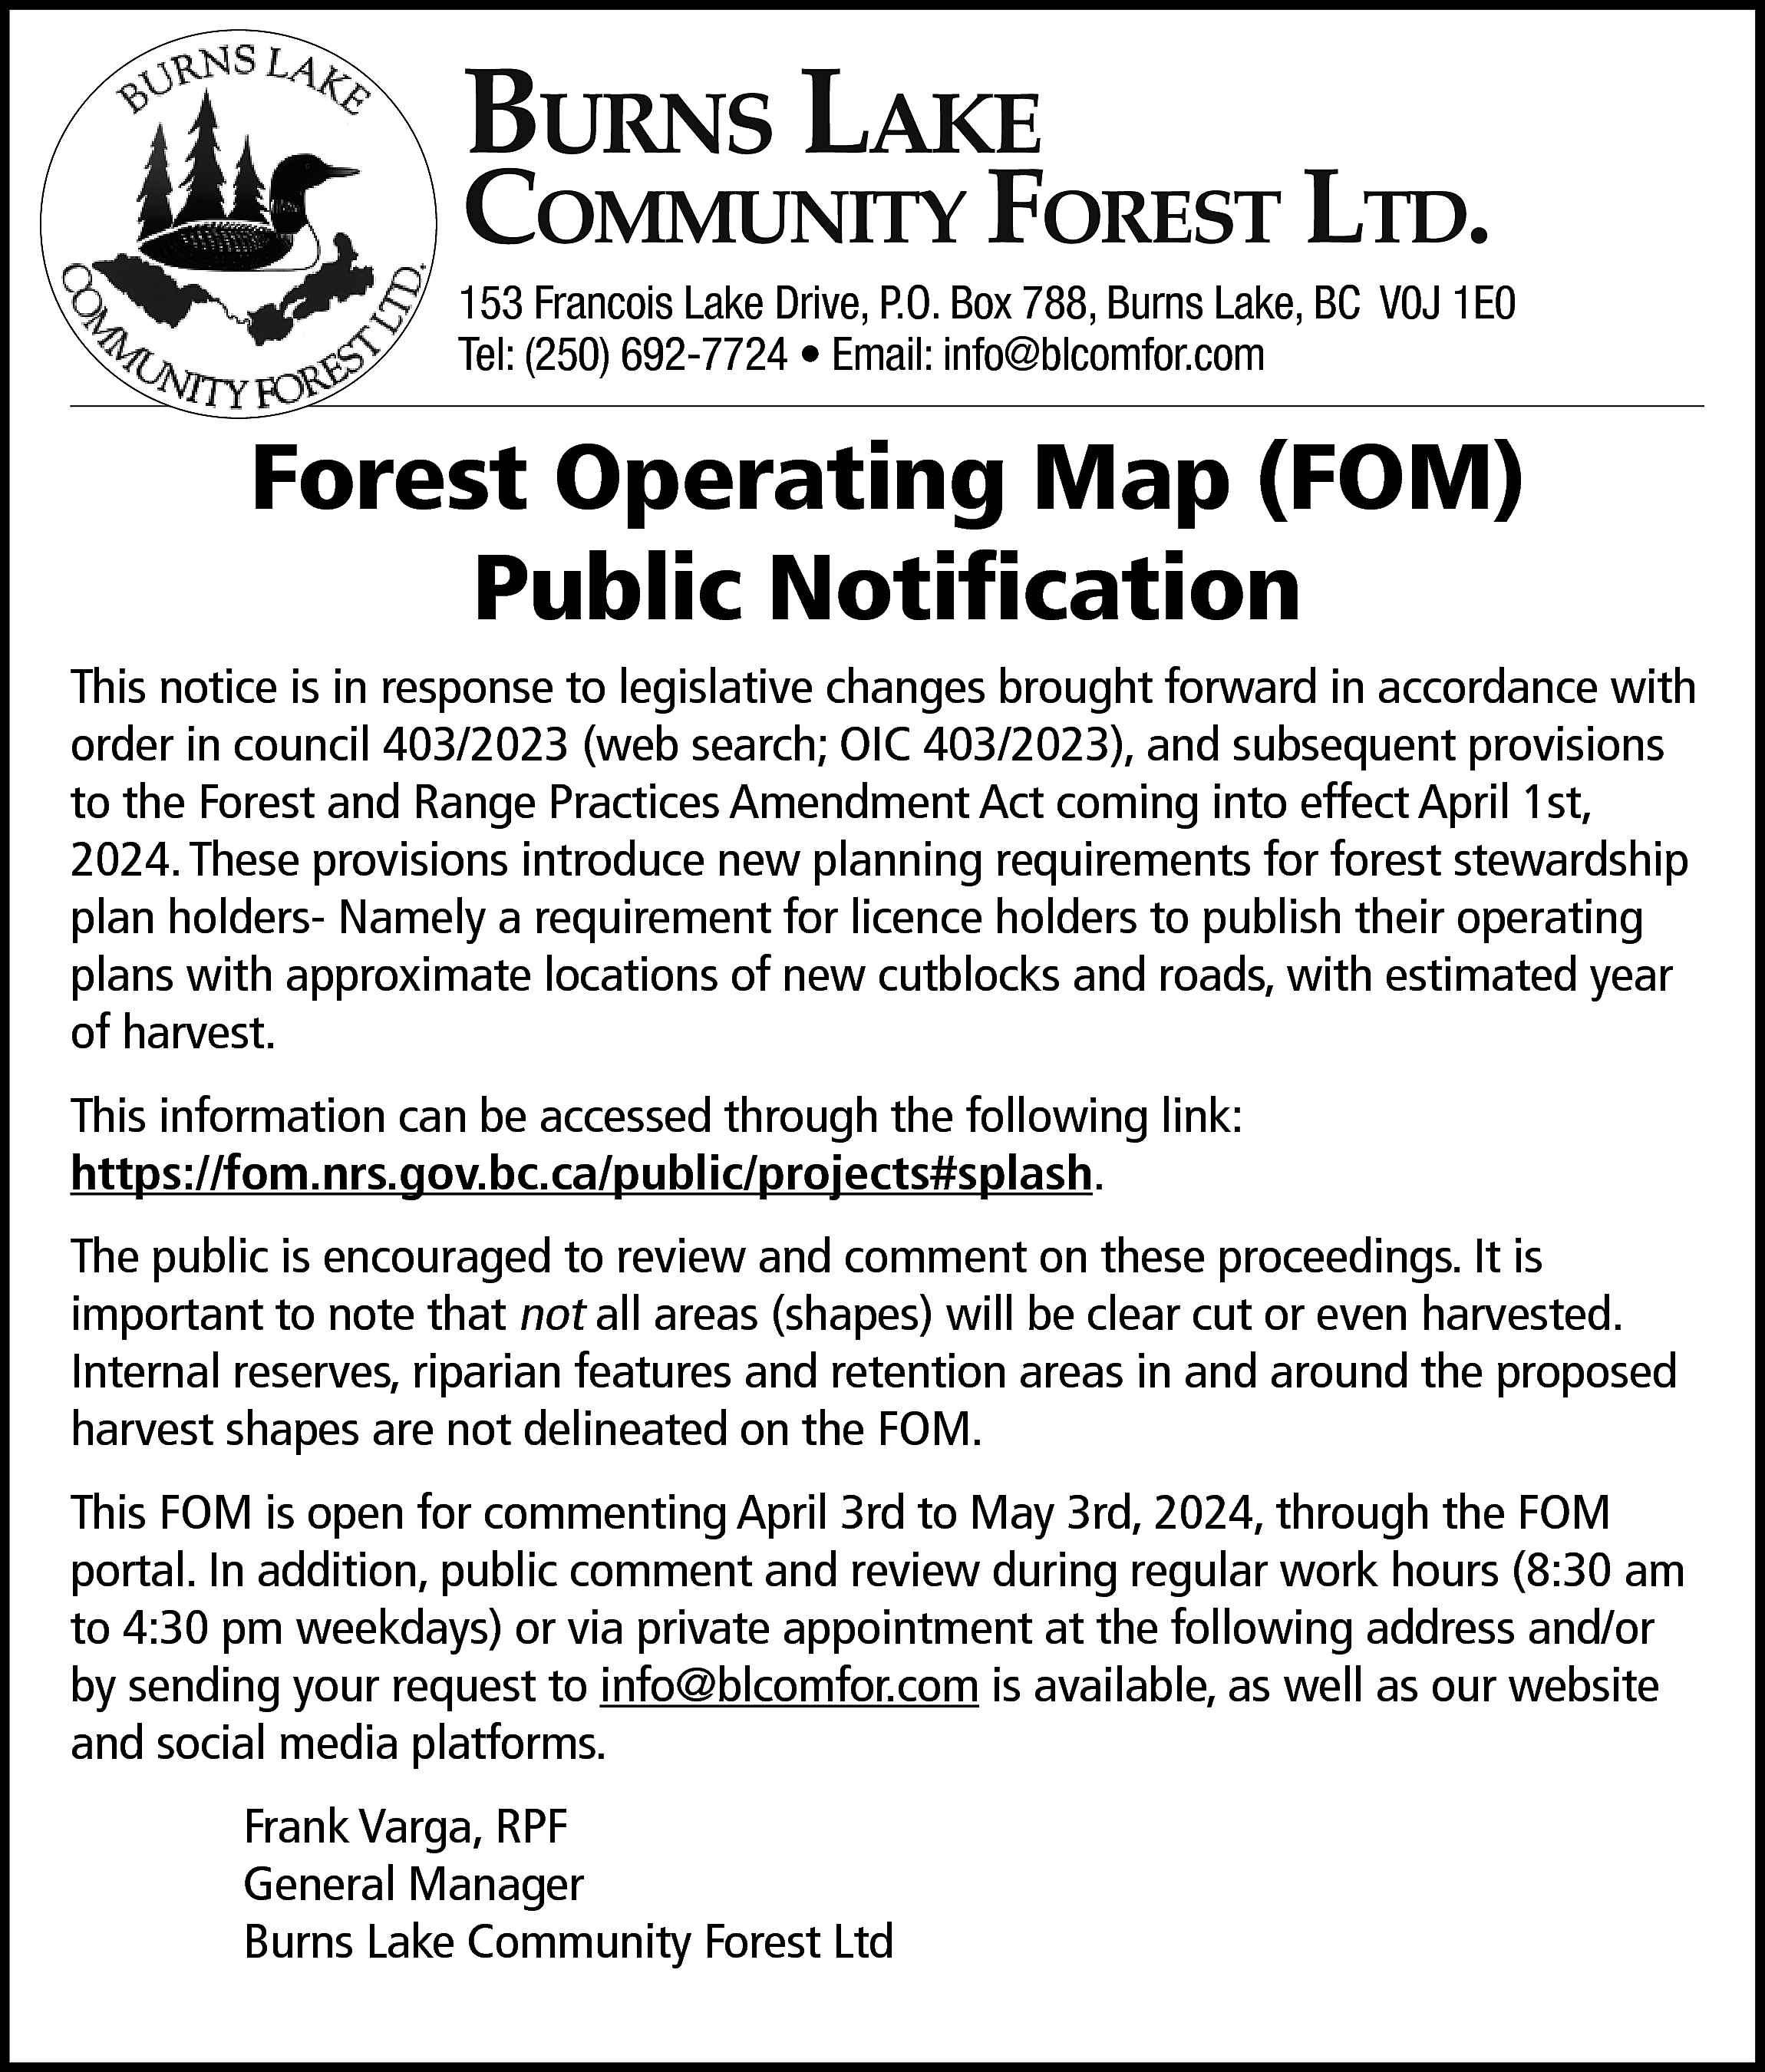 Burns Lake <br> <br>Community Forest  Burns Lake    Community Forest Ltd.    153 Francois Lake Drive, P.O. Box 788, Burns Lake, BC V0J 1E0  Tel: (250) 692-7724 • Email: info@blcomfor.com    Forest Operating Map (FOM)  Public Notification  This notice is in response to legislative changes brought forward in accordance with  order in council 403/2023 (web search; OIC 403/2023), and subsequent provisions  to the Forest and Range Practices Amendment Act coming into effect April 1st,  2024. These provisions introduce new planning requirements for forest stewardship  plan holders- Namely a requirement for licence holders to publish their operating  plans with approximate locations of new cutblocks and roads, with estimated year  of harvest.  This information can be accessed through the following link:  https://fom.nrs.gov.bc.ca/public/projects#splash.  The public is encouraged to review and comment on these proceedings. It is  important to note that not all areas (shapes) will be clear cut or even harvested.  Internal reserves, riparian features and retention areas in and around the proposed  harvest shapes are not delineated on the FOM.  This FOM is open for commenting April 3rd to May 3rd, 2024, through the FOM  portal. In addition, public comment and review during regular work hours (8:30 am  to 4:30 pm weekdays) or via private appointment at the following address and/or  by sending your request to info@blcomfor.com is available, as well as our website  and social media platforms.  Frank Varga, RPF  General Manager  Burns Lake Community Forest Ltd    